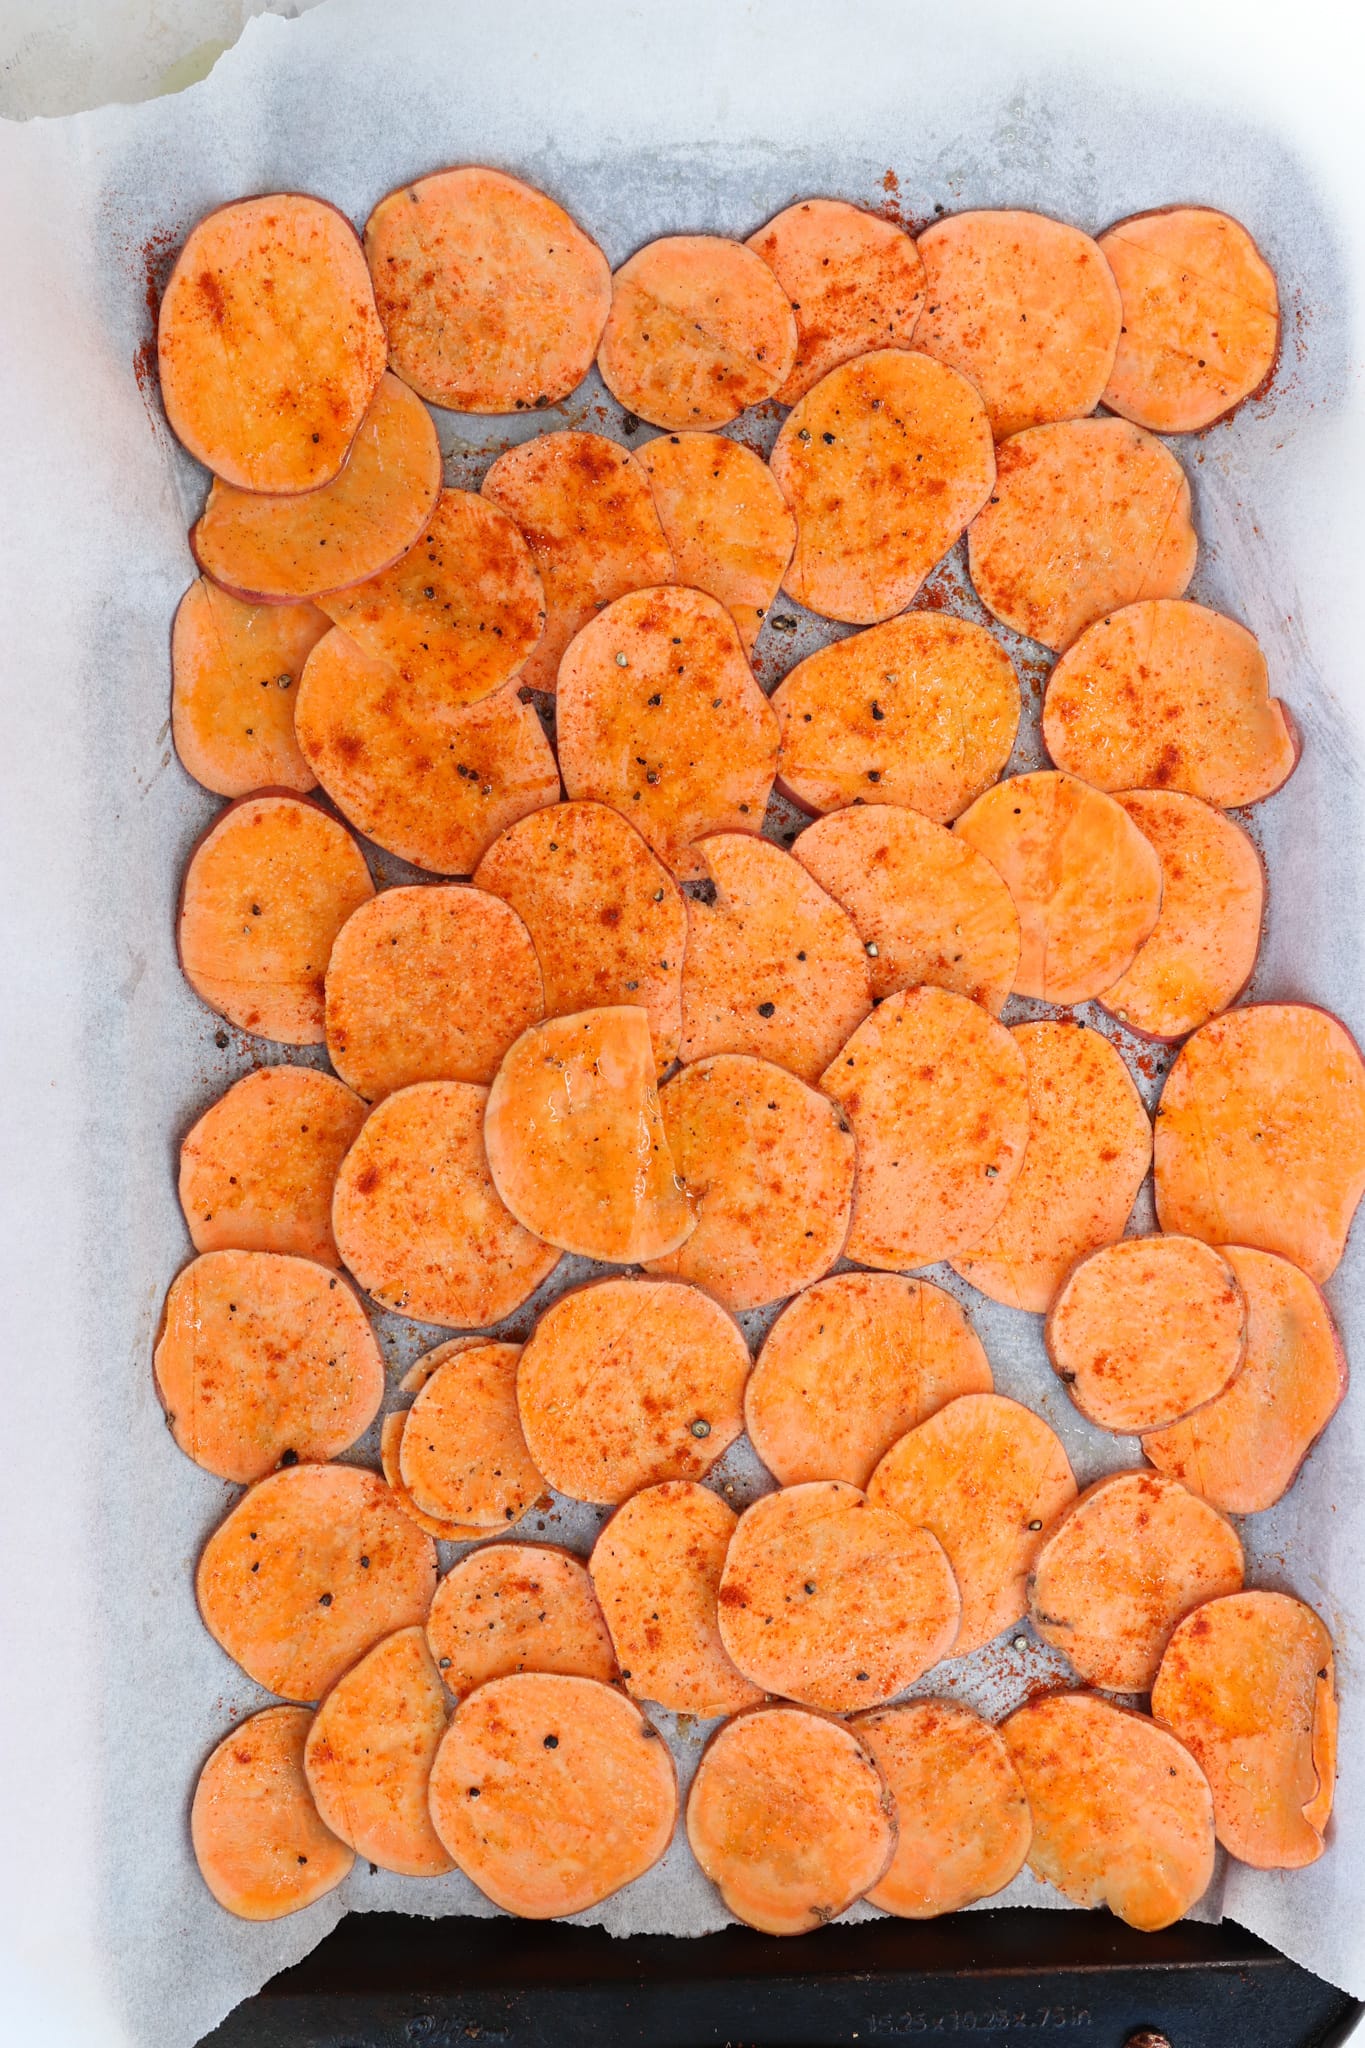 How To Make Homemade Sweet Potato Chips: Step by Step - Lindsay Pleskot, RD